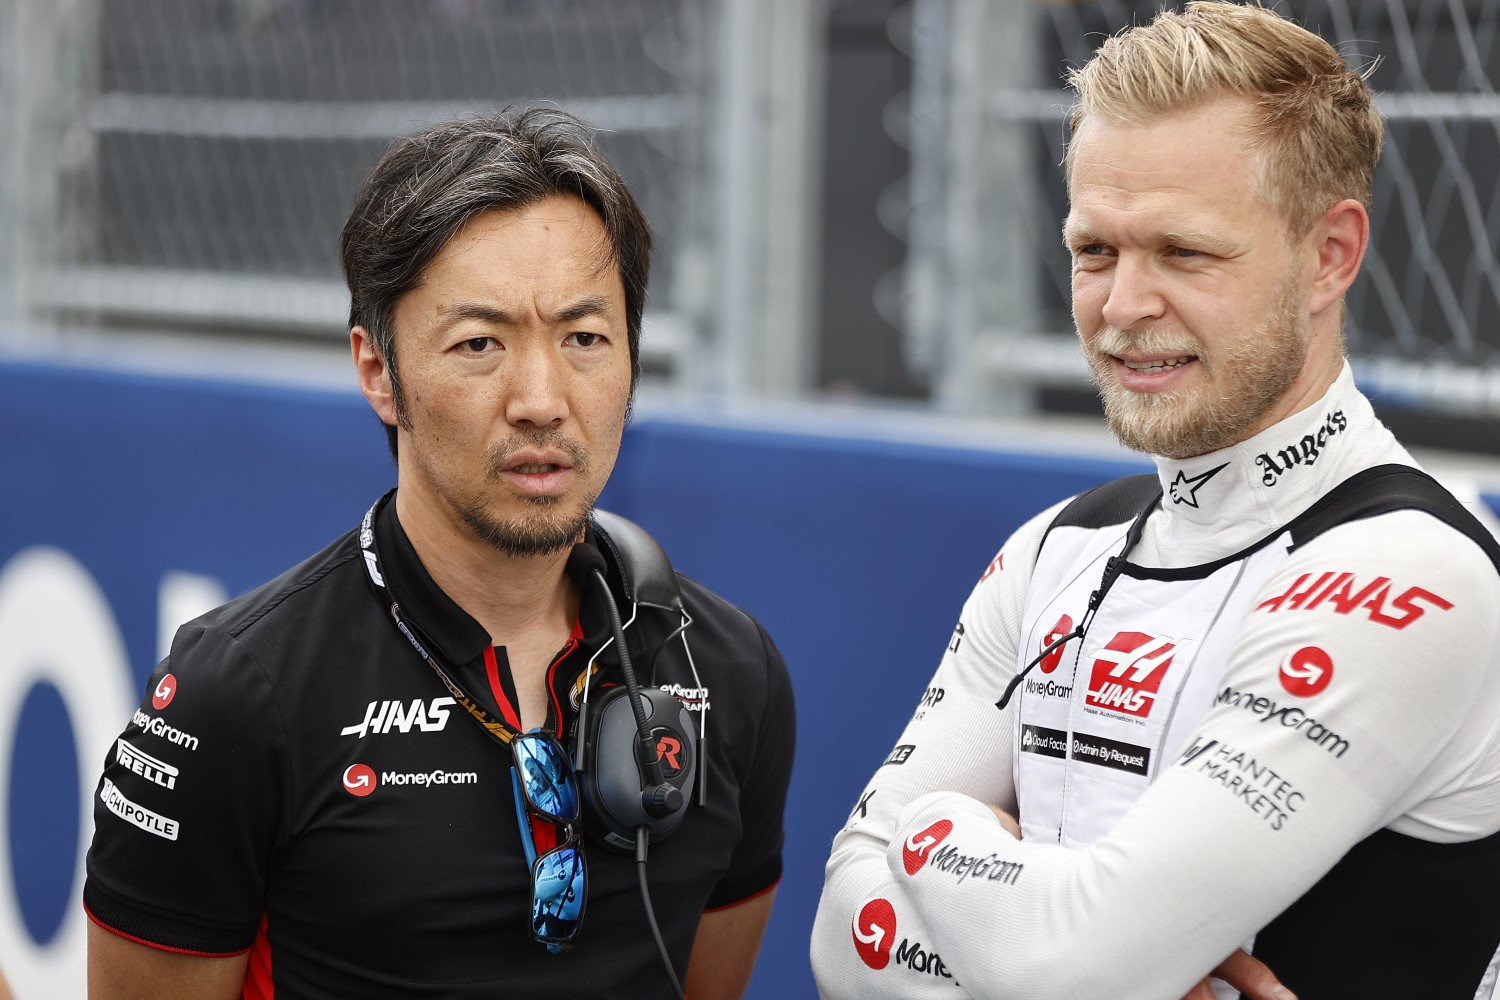 Ayao Komatsu, Chief Engineer, Haas F1 Team, and Kevin Magnussen, Haas F1 Team, on the grid during the Miami GP at Miami International Autodrome on Sunday May 07, 2023 in Miami, United States of America. (Photo by Andy Hone / LAT Images)